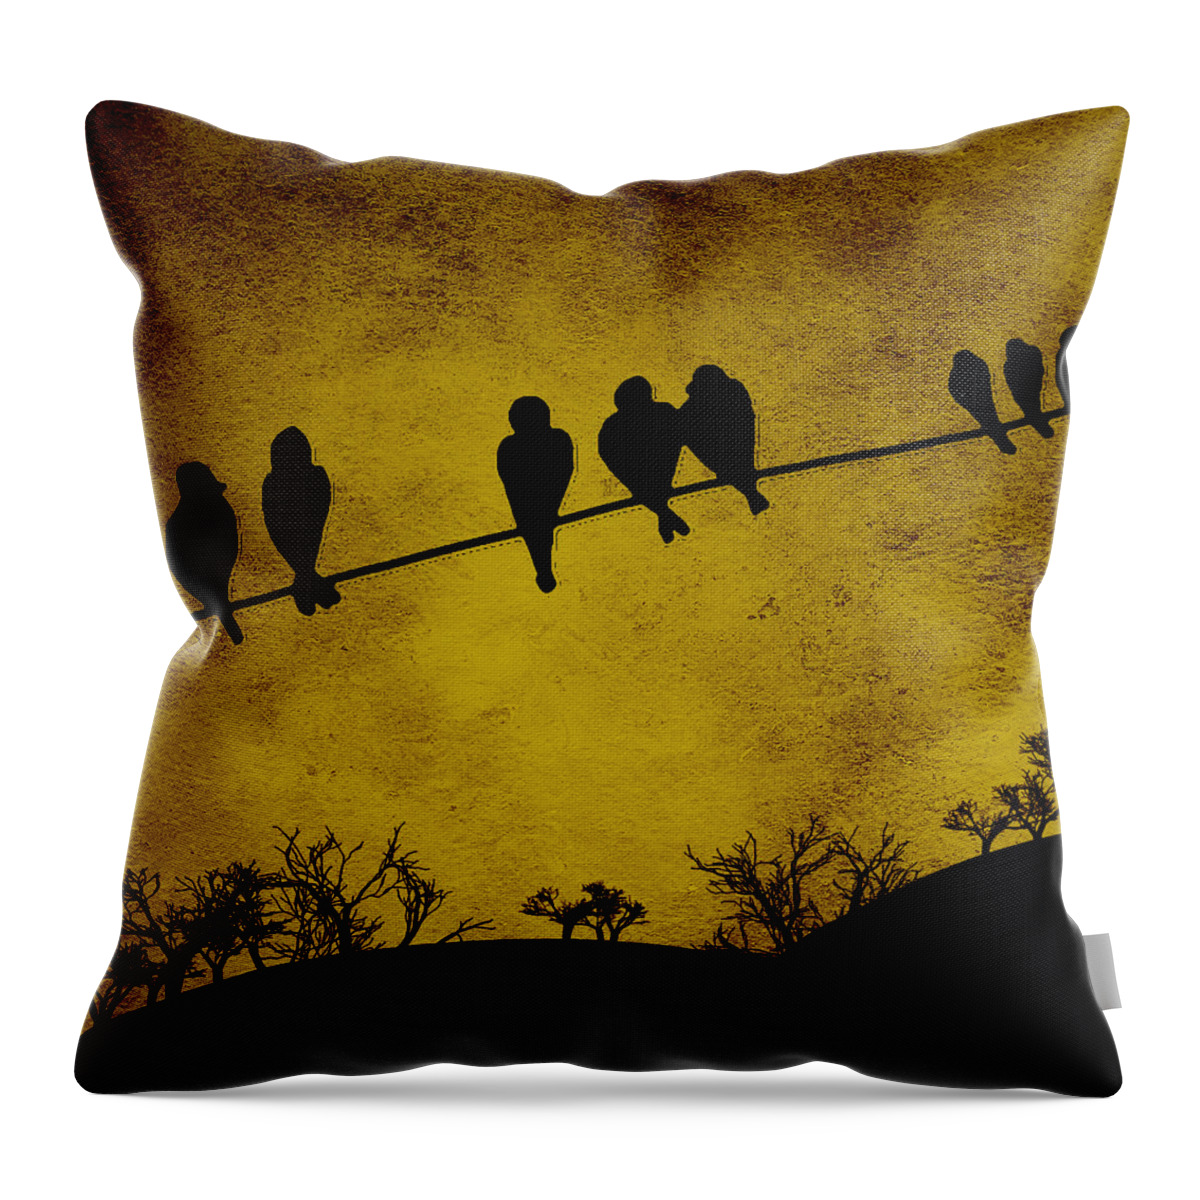 Digital Throw Pillow featuring the digital art End of the Day by Bonnie Bruno